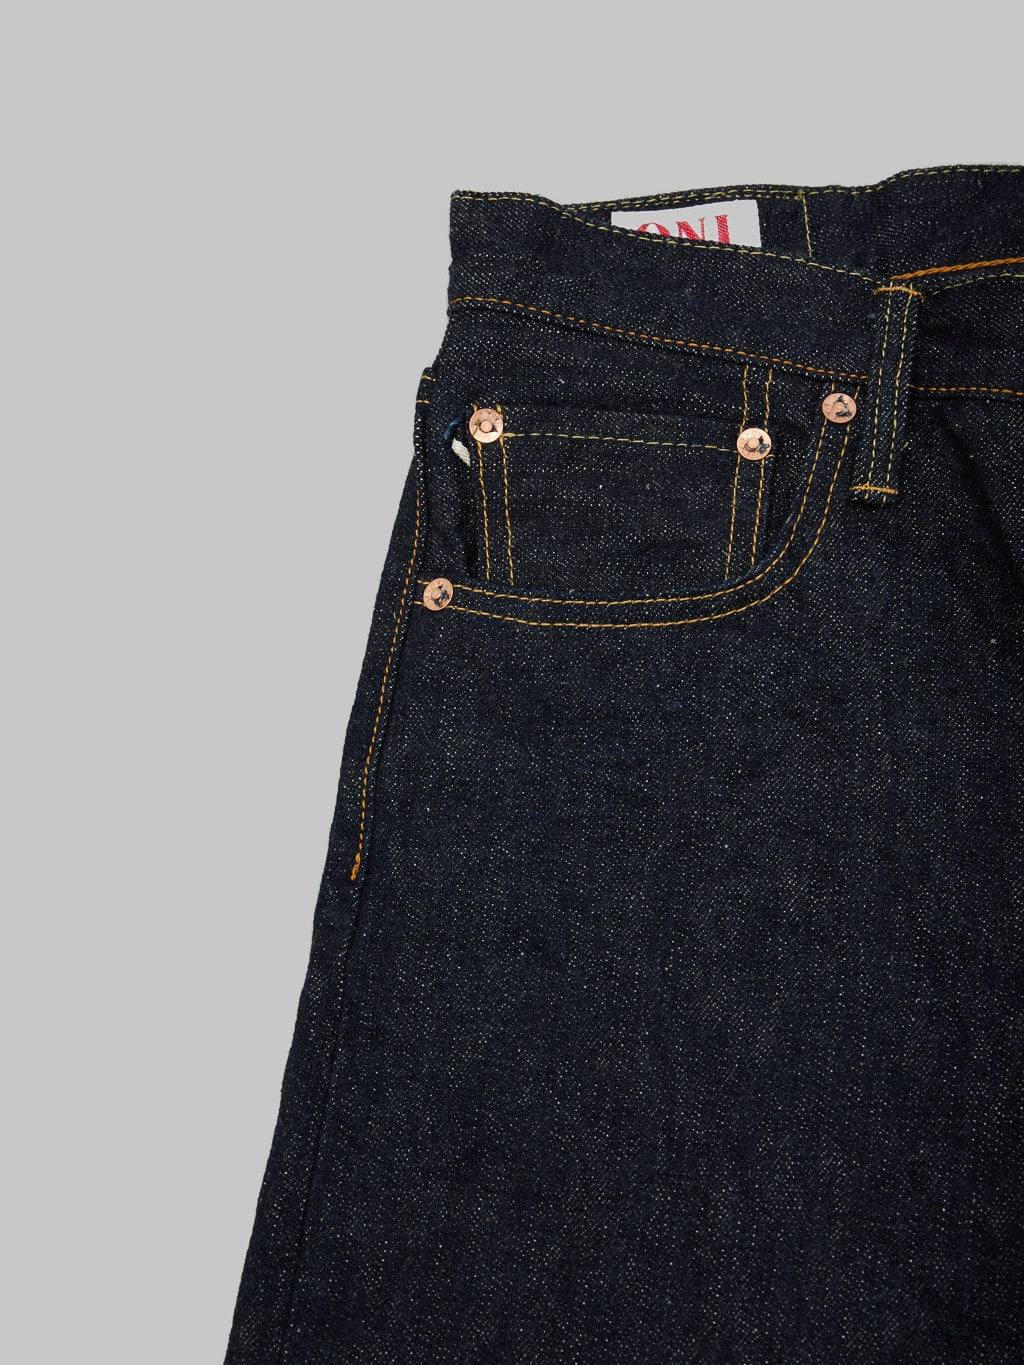 ONI 525 Natural Indigo Rope Dyeing Denim Classic Straight Jeans coin pocket